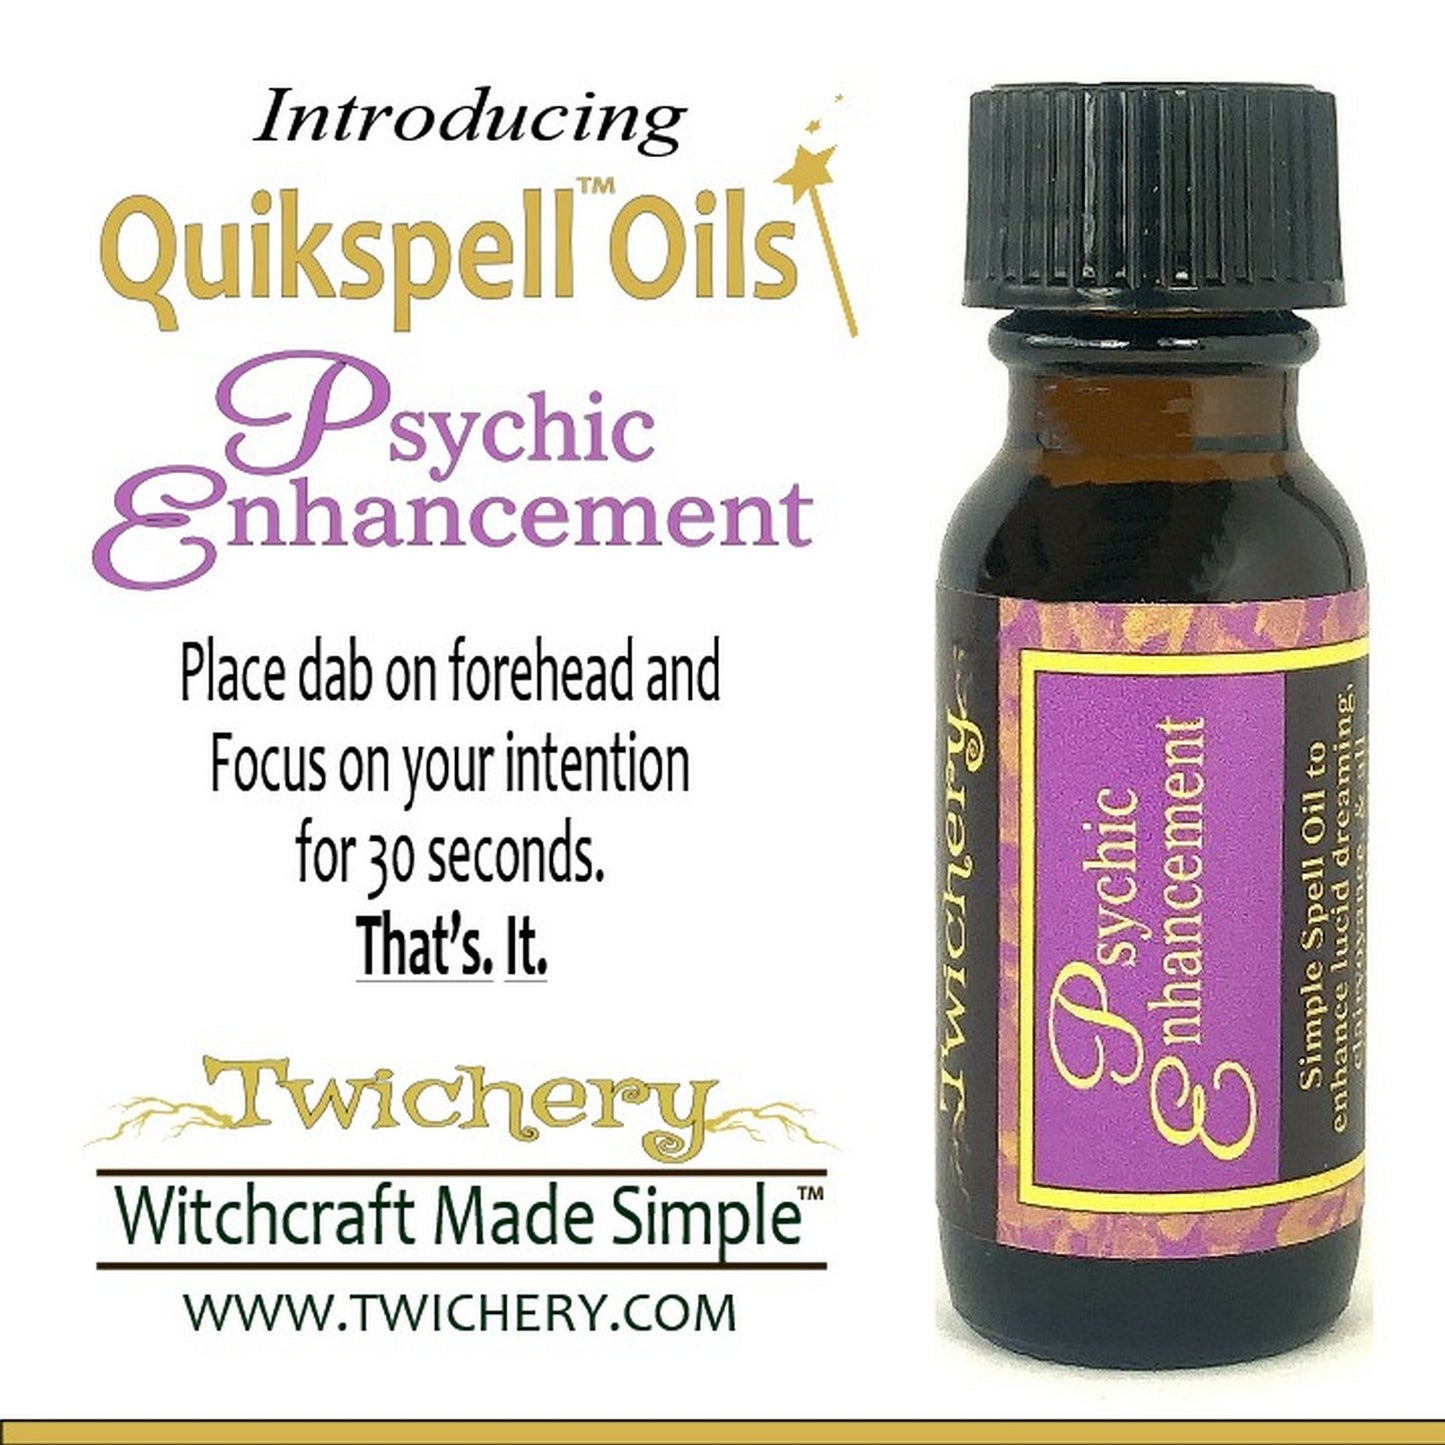 Open your third eye with Twichery Quikspell Psychic Enhancement Oil. Hoodoo Voodoo Wicca Pagan. Twichery is Witchcraft Made Simple